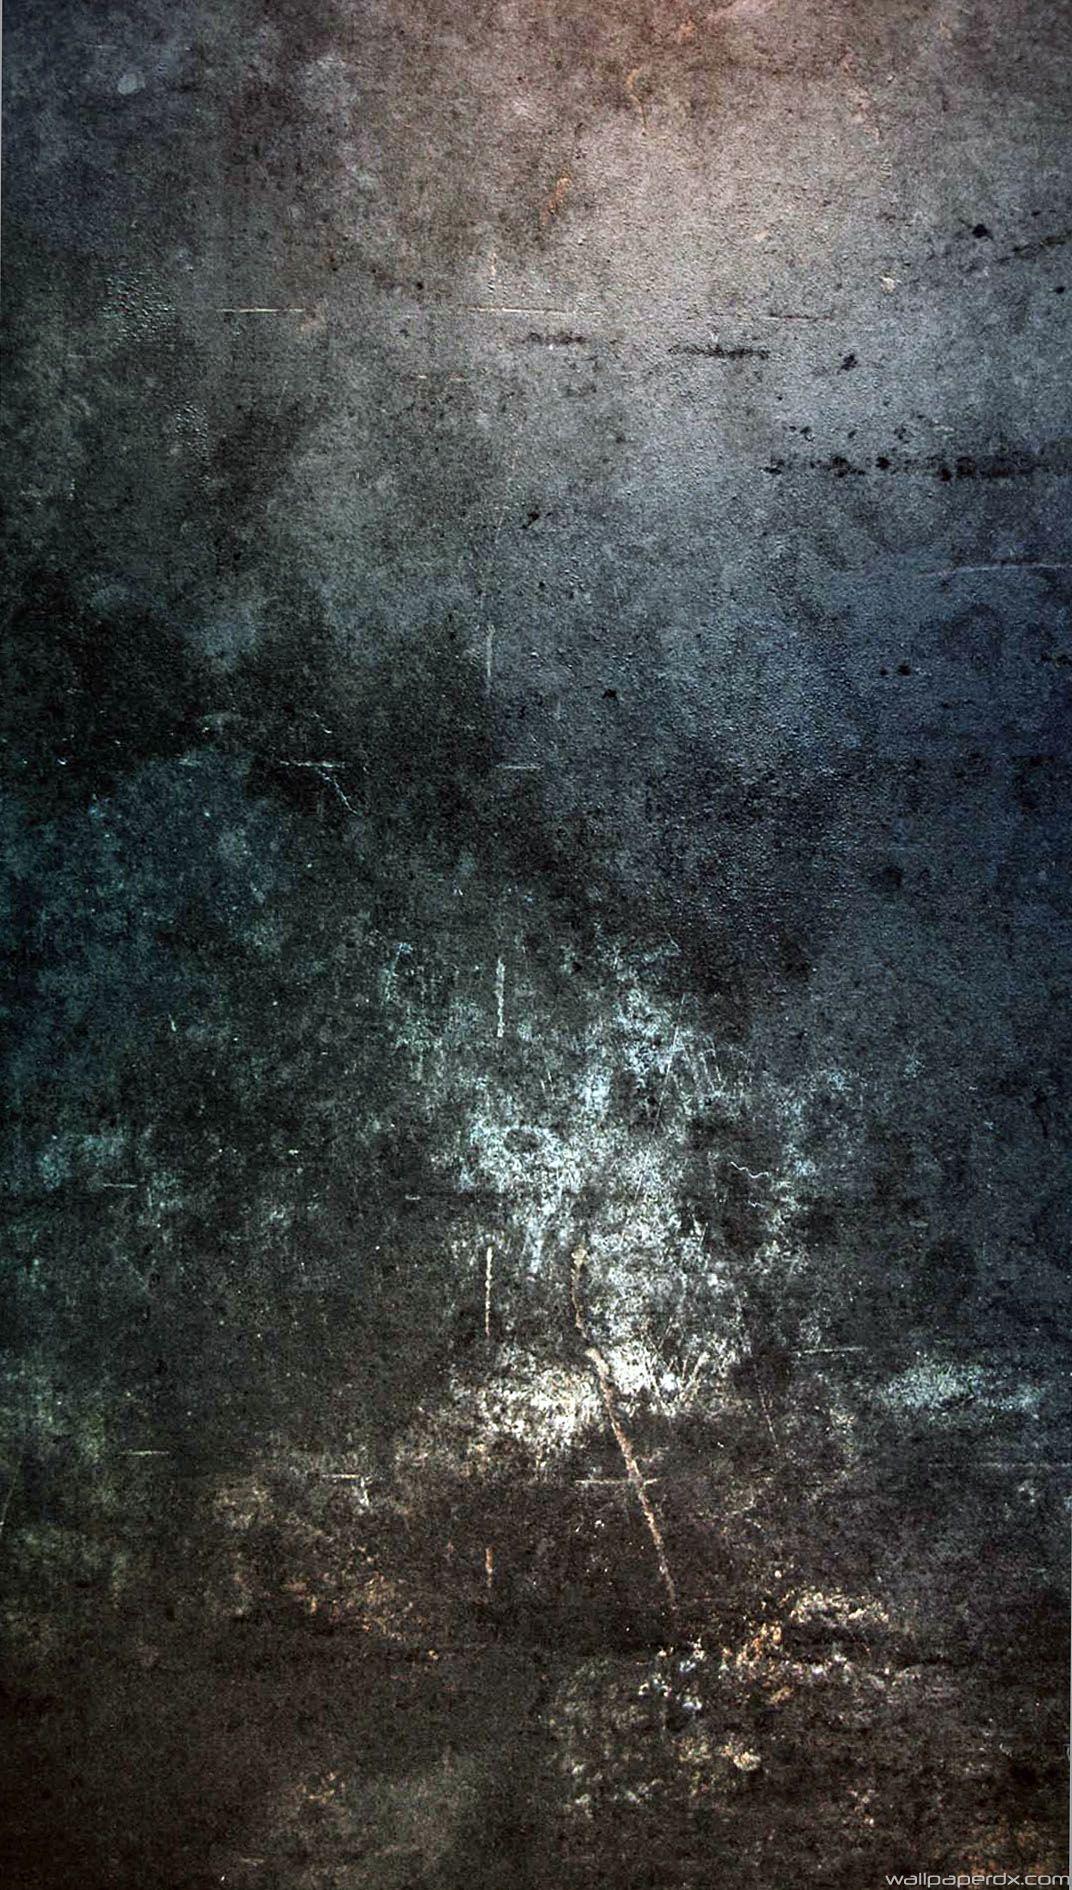 Grunge Wall Texture Full HD Android Wallpaper.com